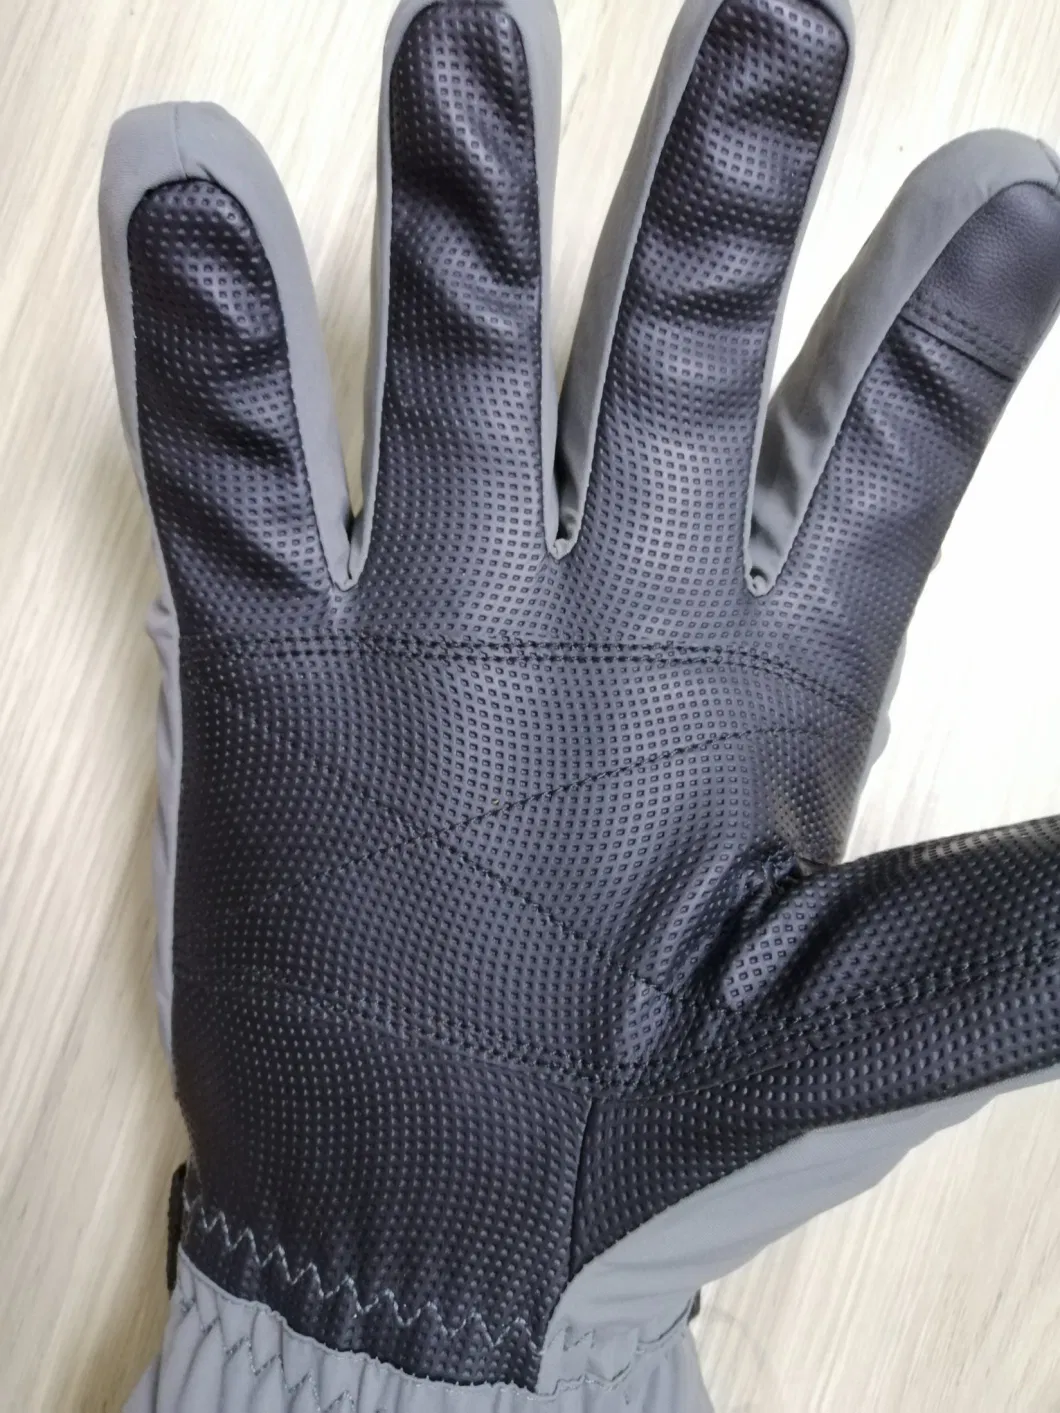 Waterproof Touchscreen Ski Gloves 3m Thinsulate Winter Snow Gloves with Pocket